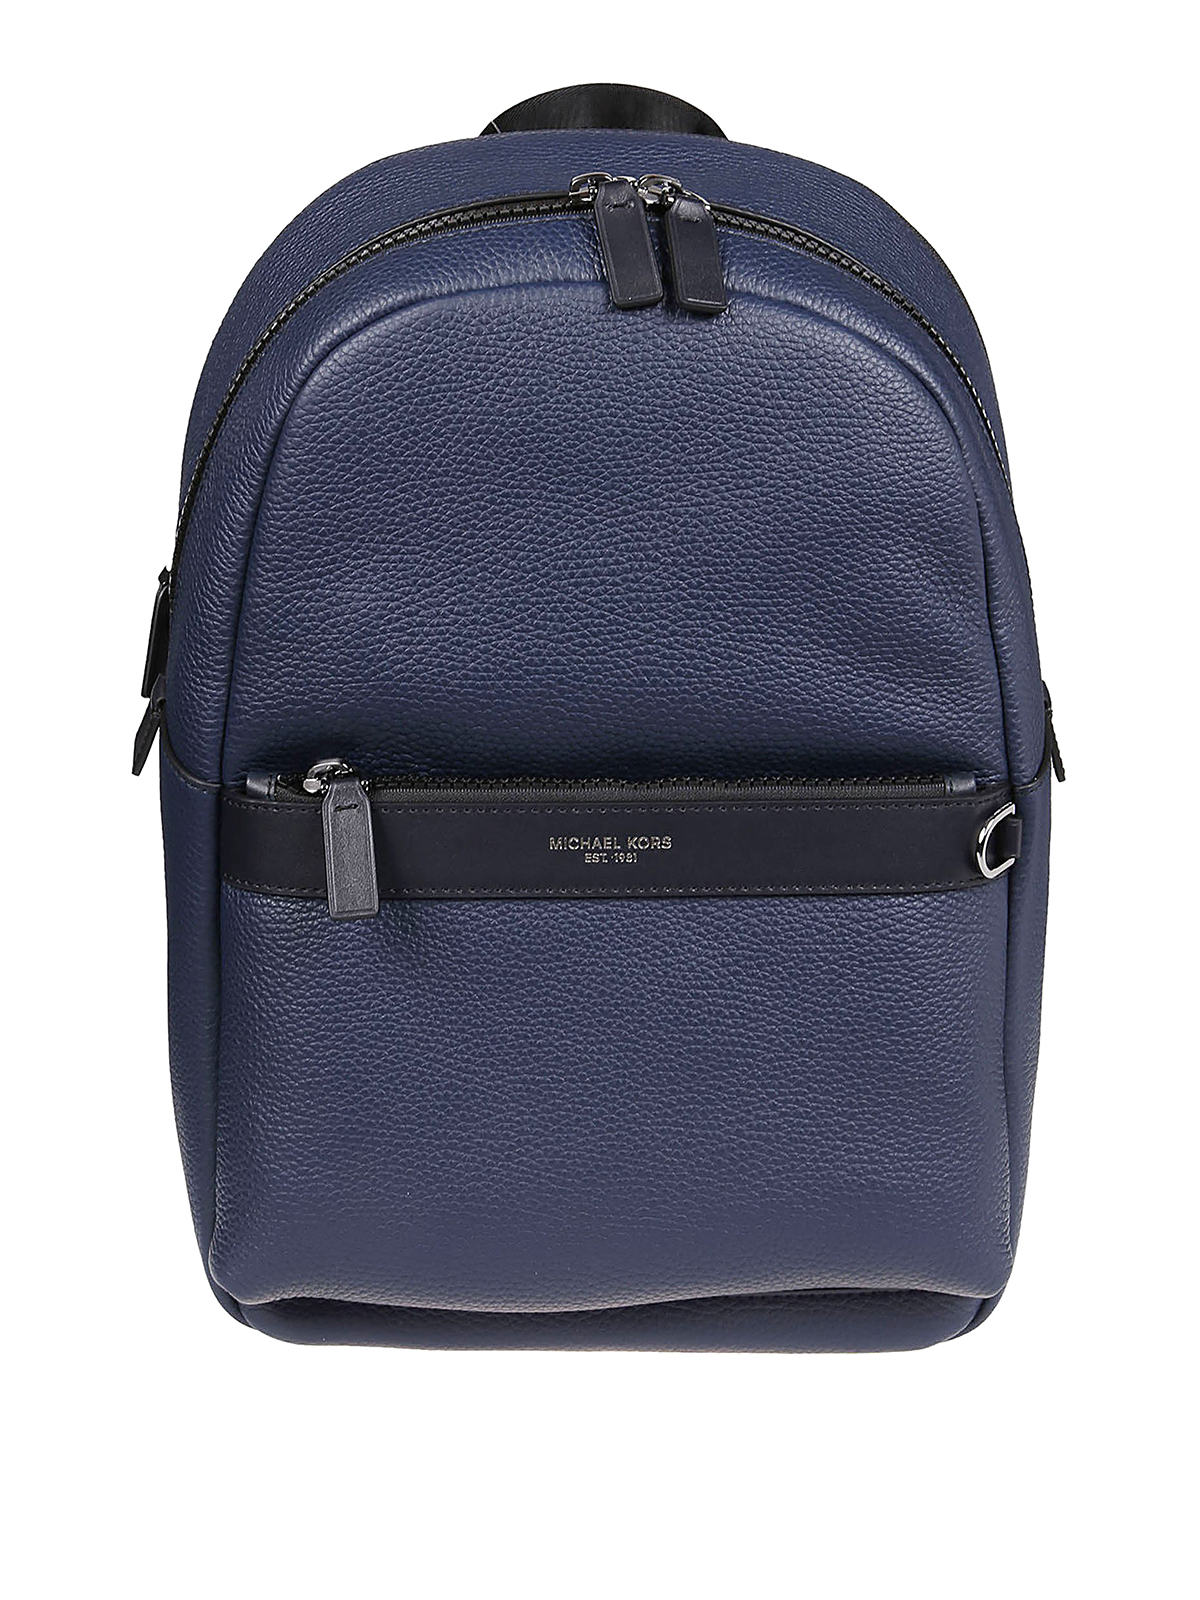 Greyson blue pebble leather backpack 